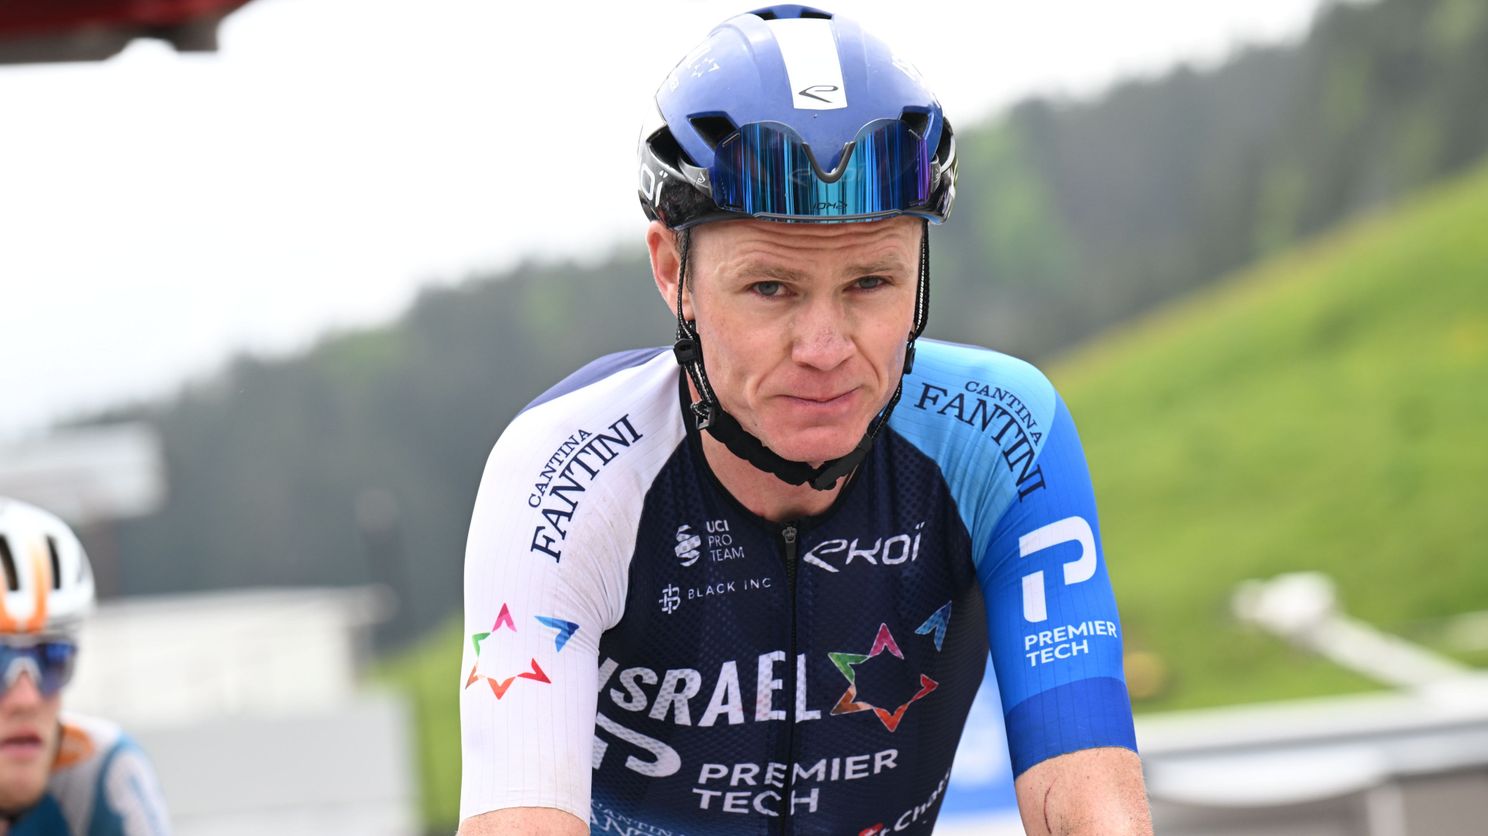 Froome and Riccitello out, but other great performers in: Israel-Premier Tech announces Tour selection